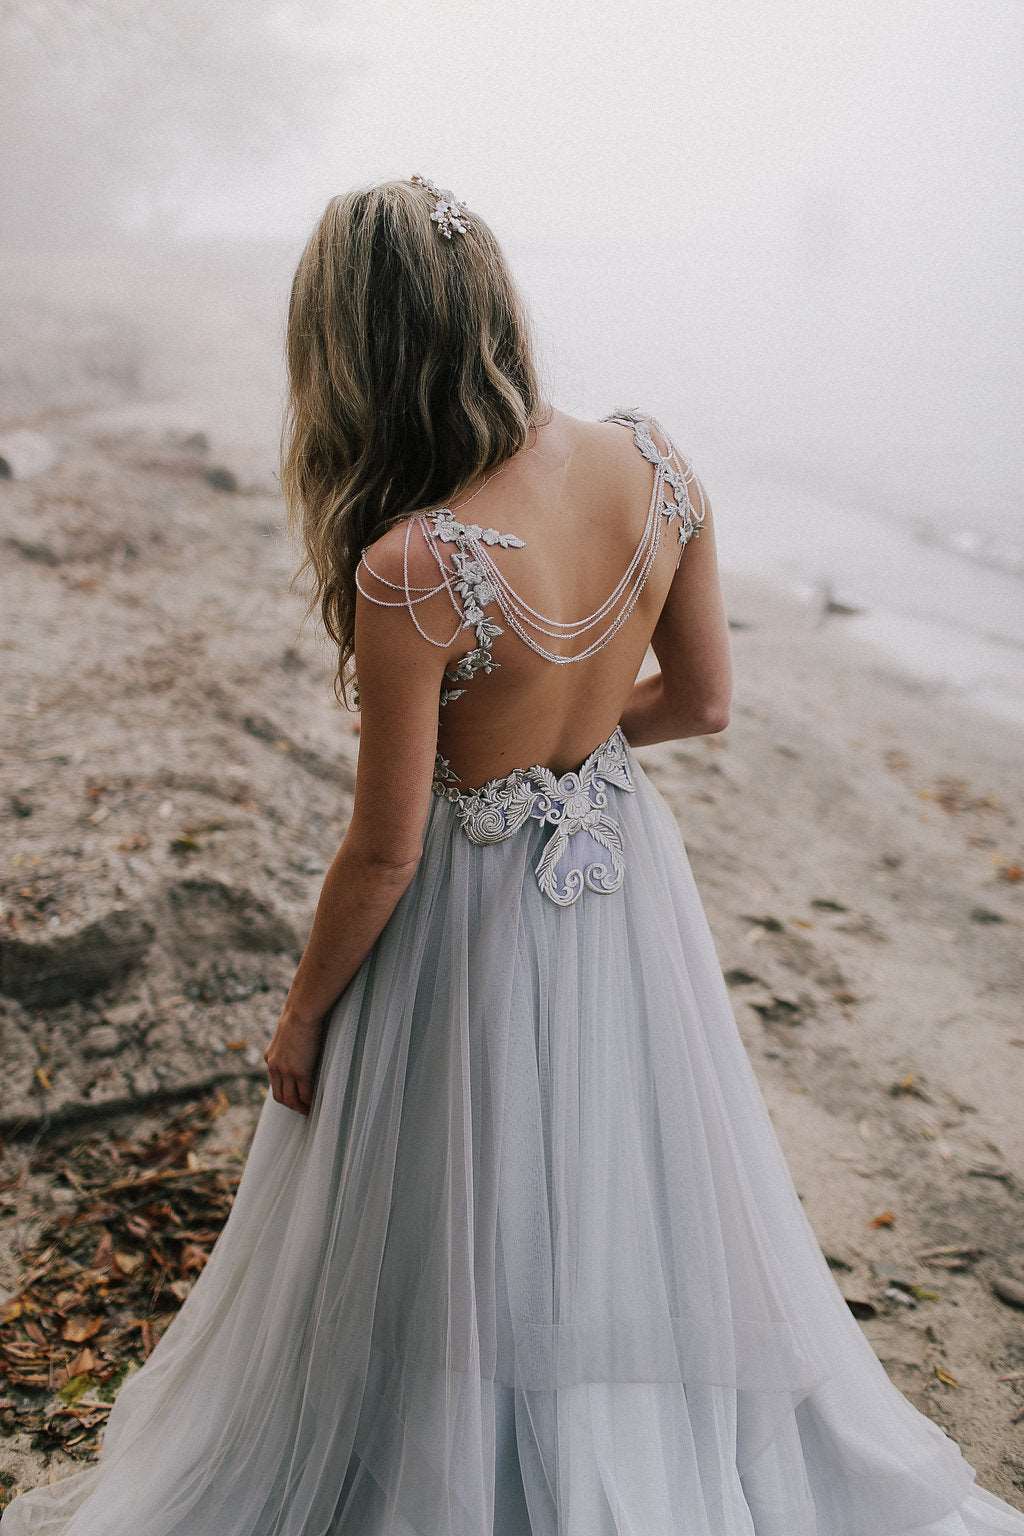 Whimsical blue grey tulle wedding dress by Catherine Langlois